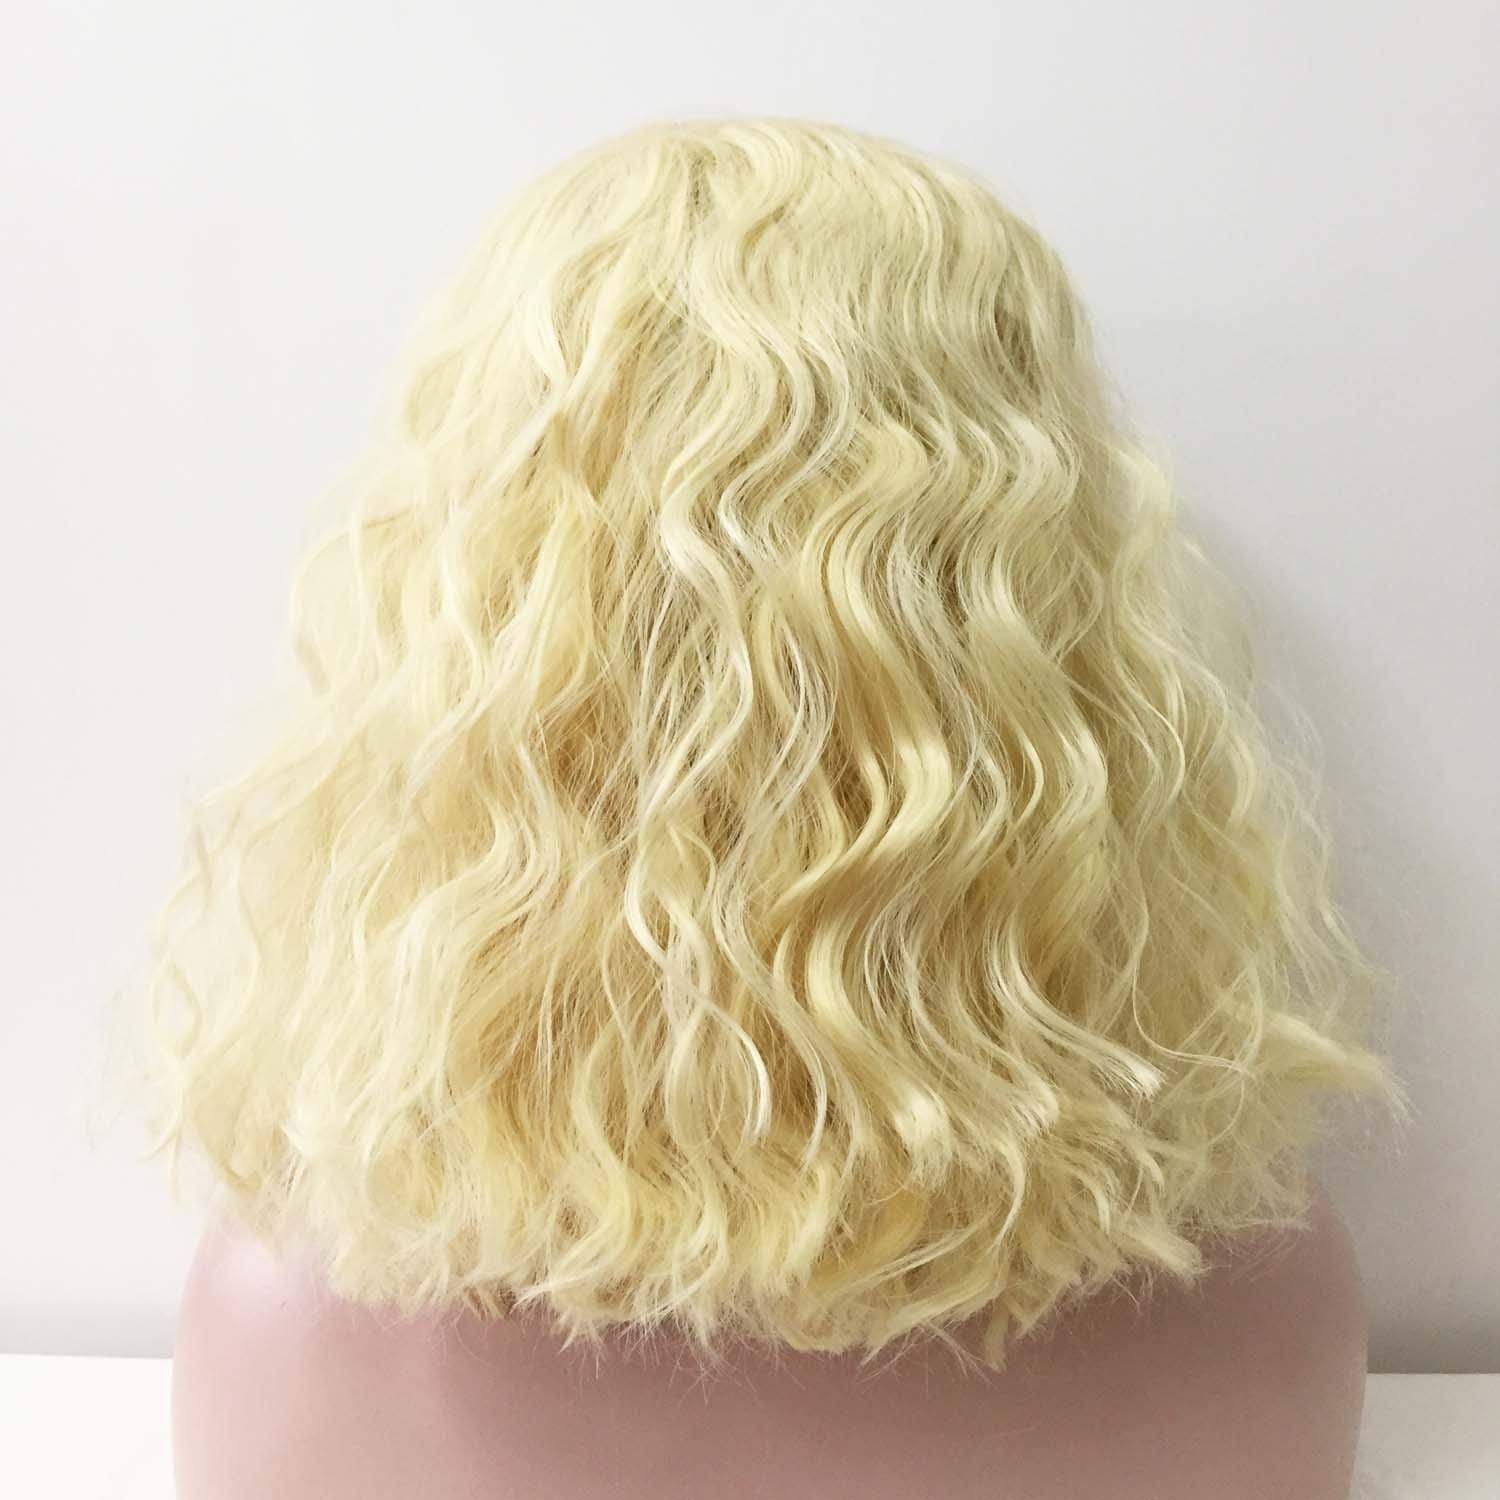 nevermindyrhead Women Lace Front Side Part Blonde Big Wave Curly Twirly Messy Curls Wig